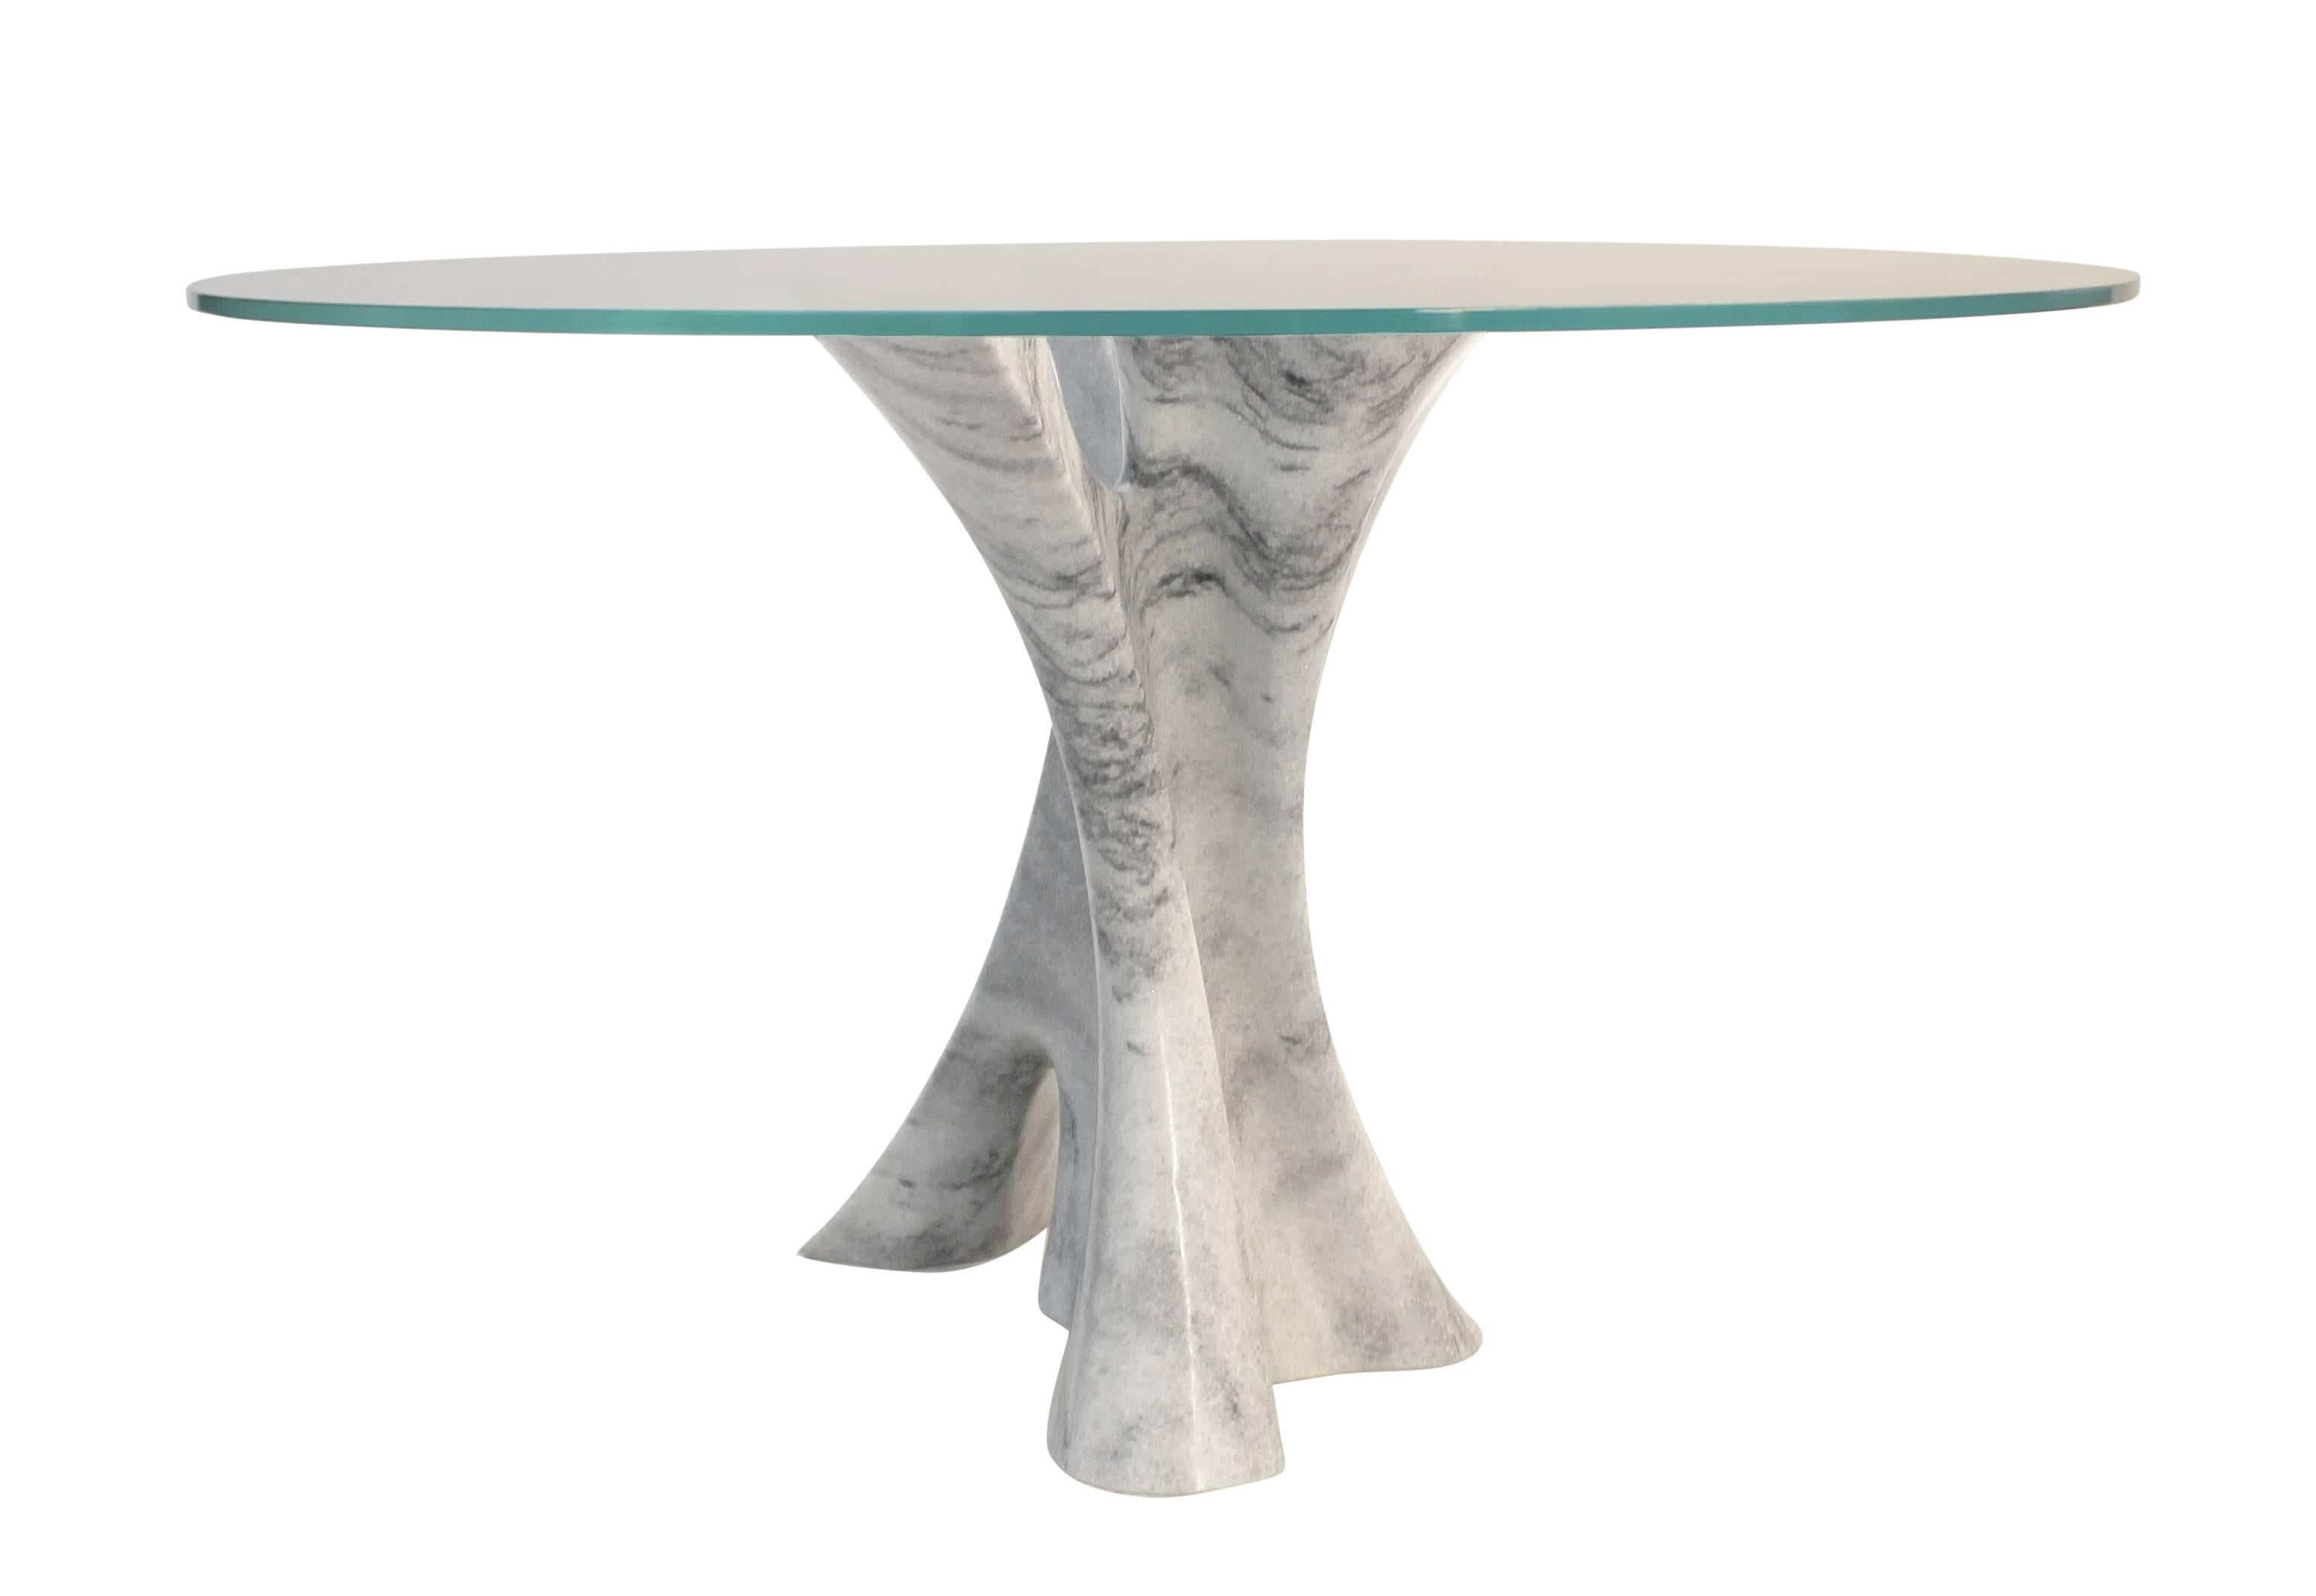 Other Interface carved solid marble block dining table with glass top. For Sale